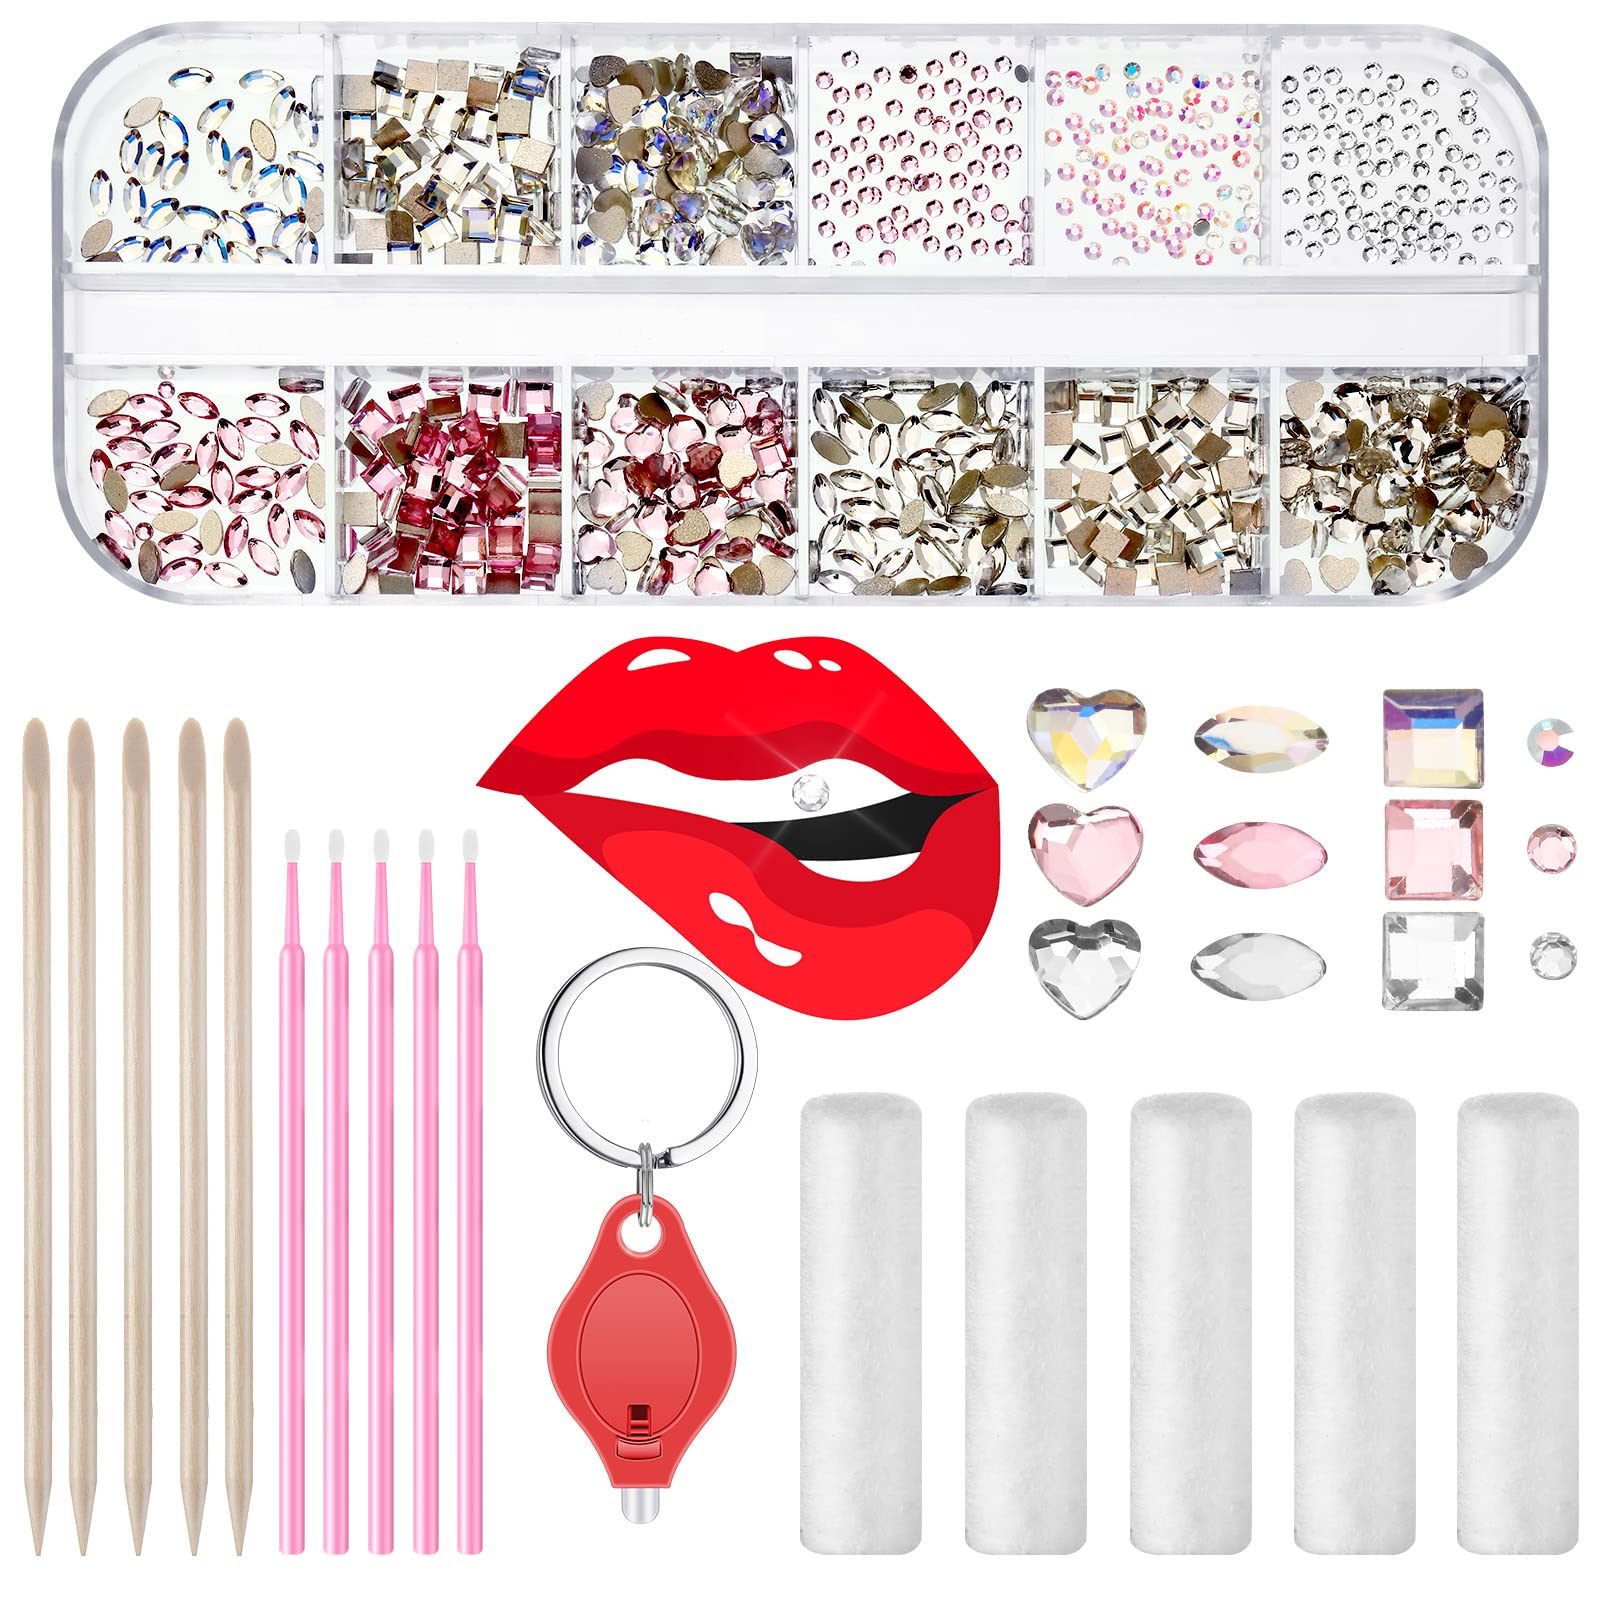  Landhoow 480 Pcs Tooth Gem Kit DIY Teeth Crystals Jewelry Kit  Fashionable Teeth Gems Kit Artificial Crystal Tooth Ornaments for  Reflective Teeth (Pink) : Office Products